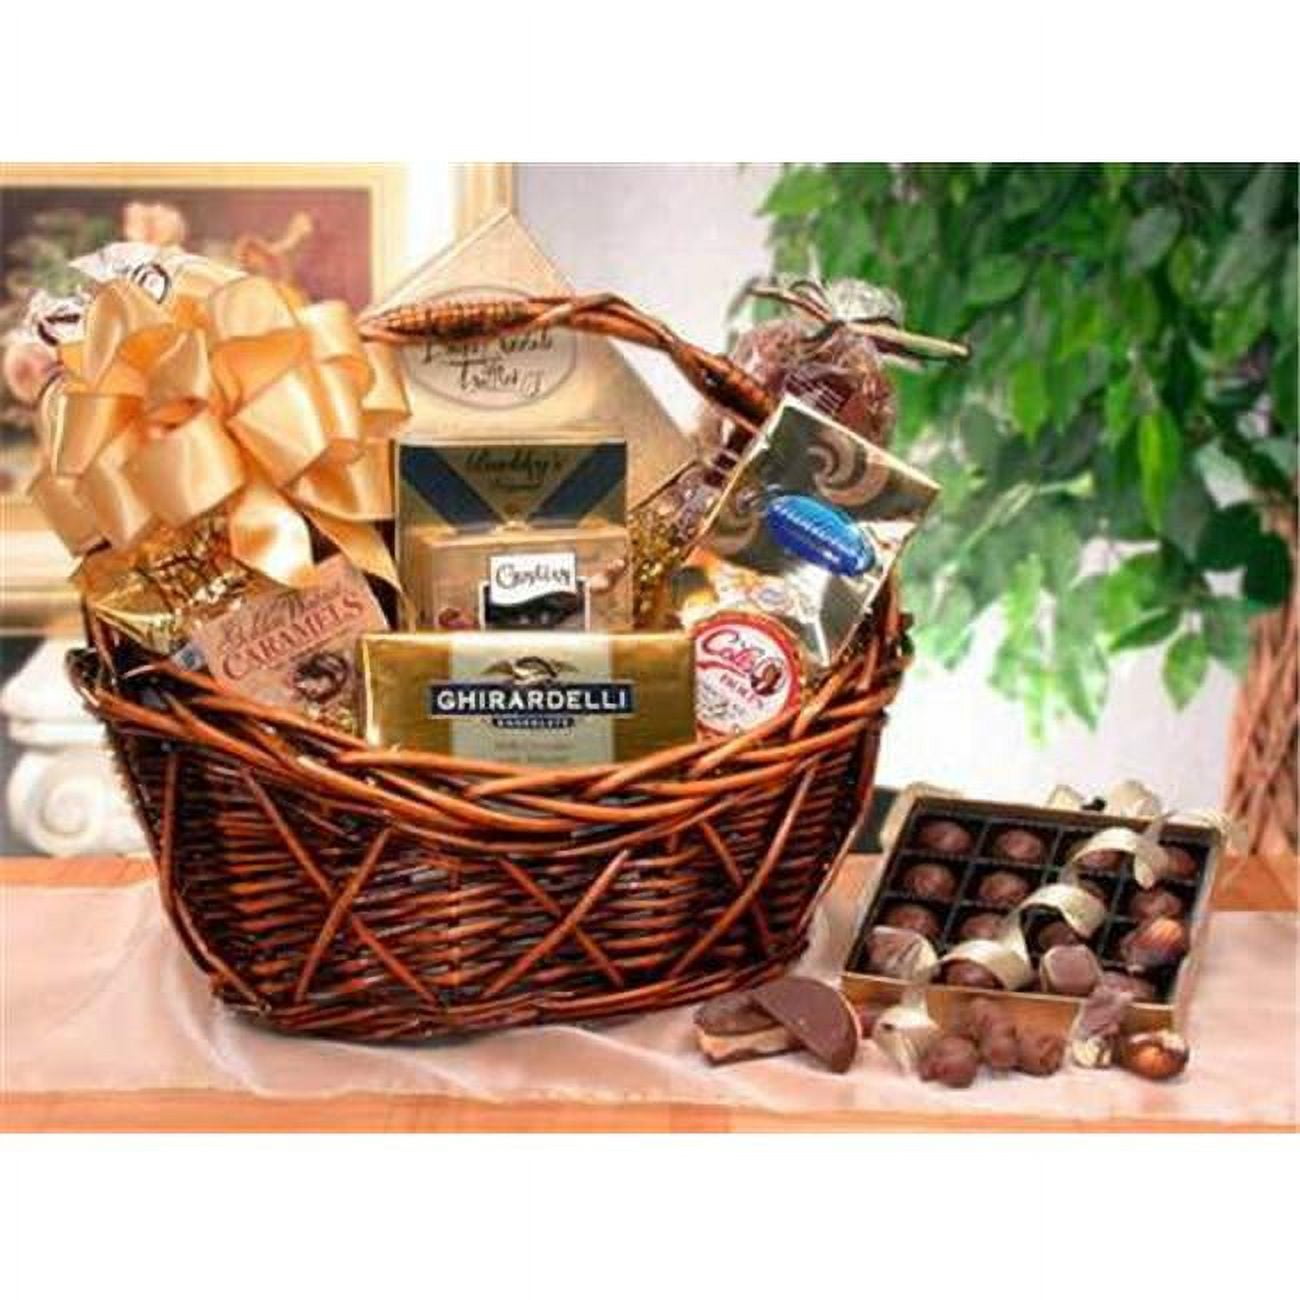 The Gift Basket, Shell Bracelet and Woven Basket